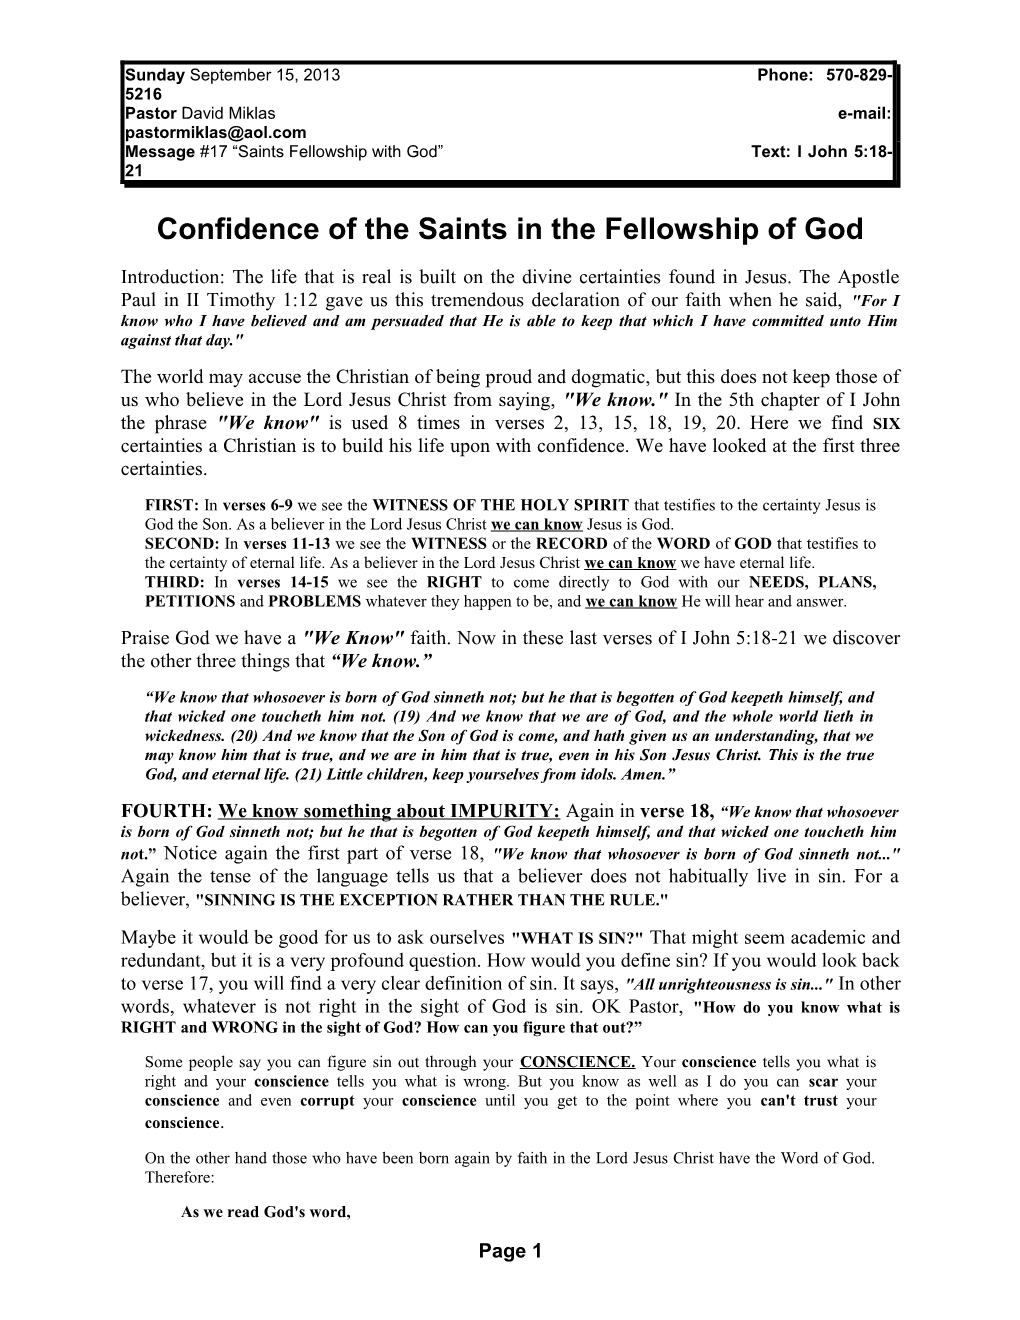 Confidence of the Saints in the Fellowship of God